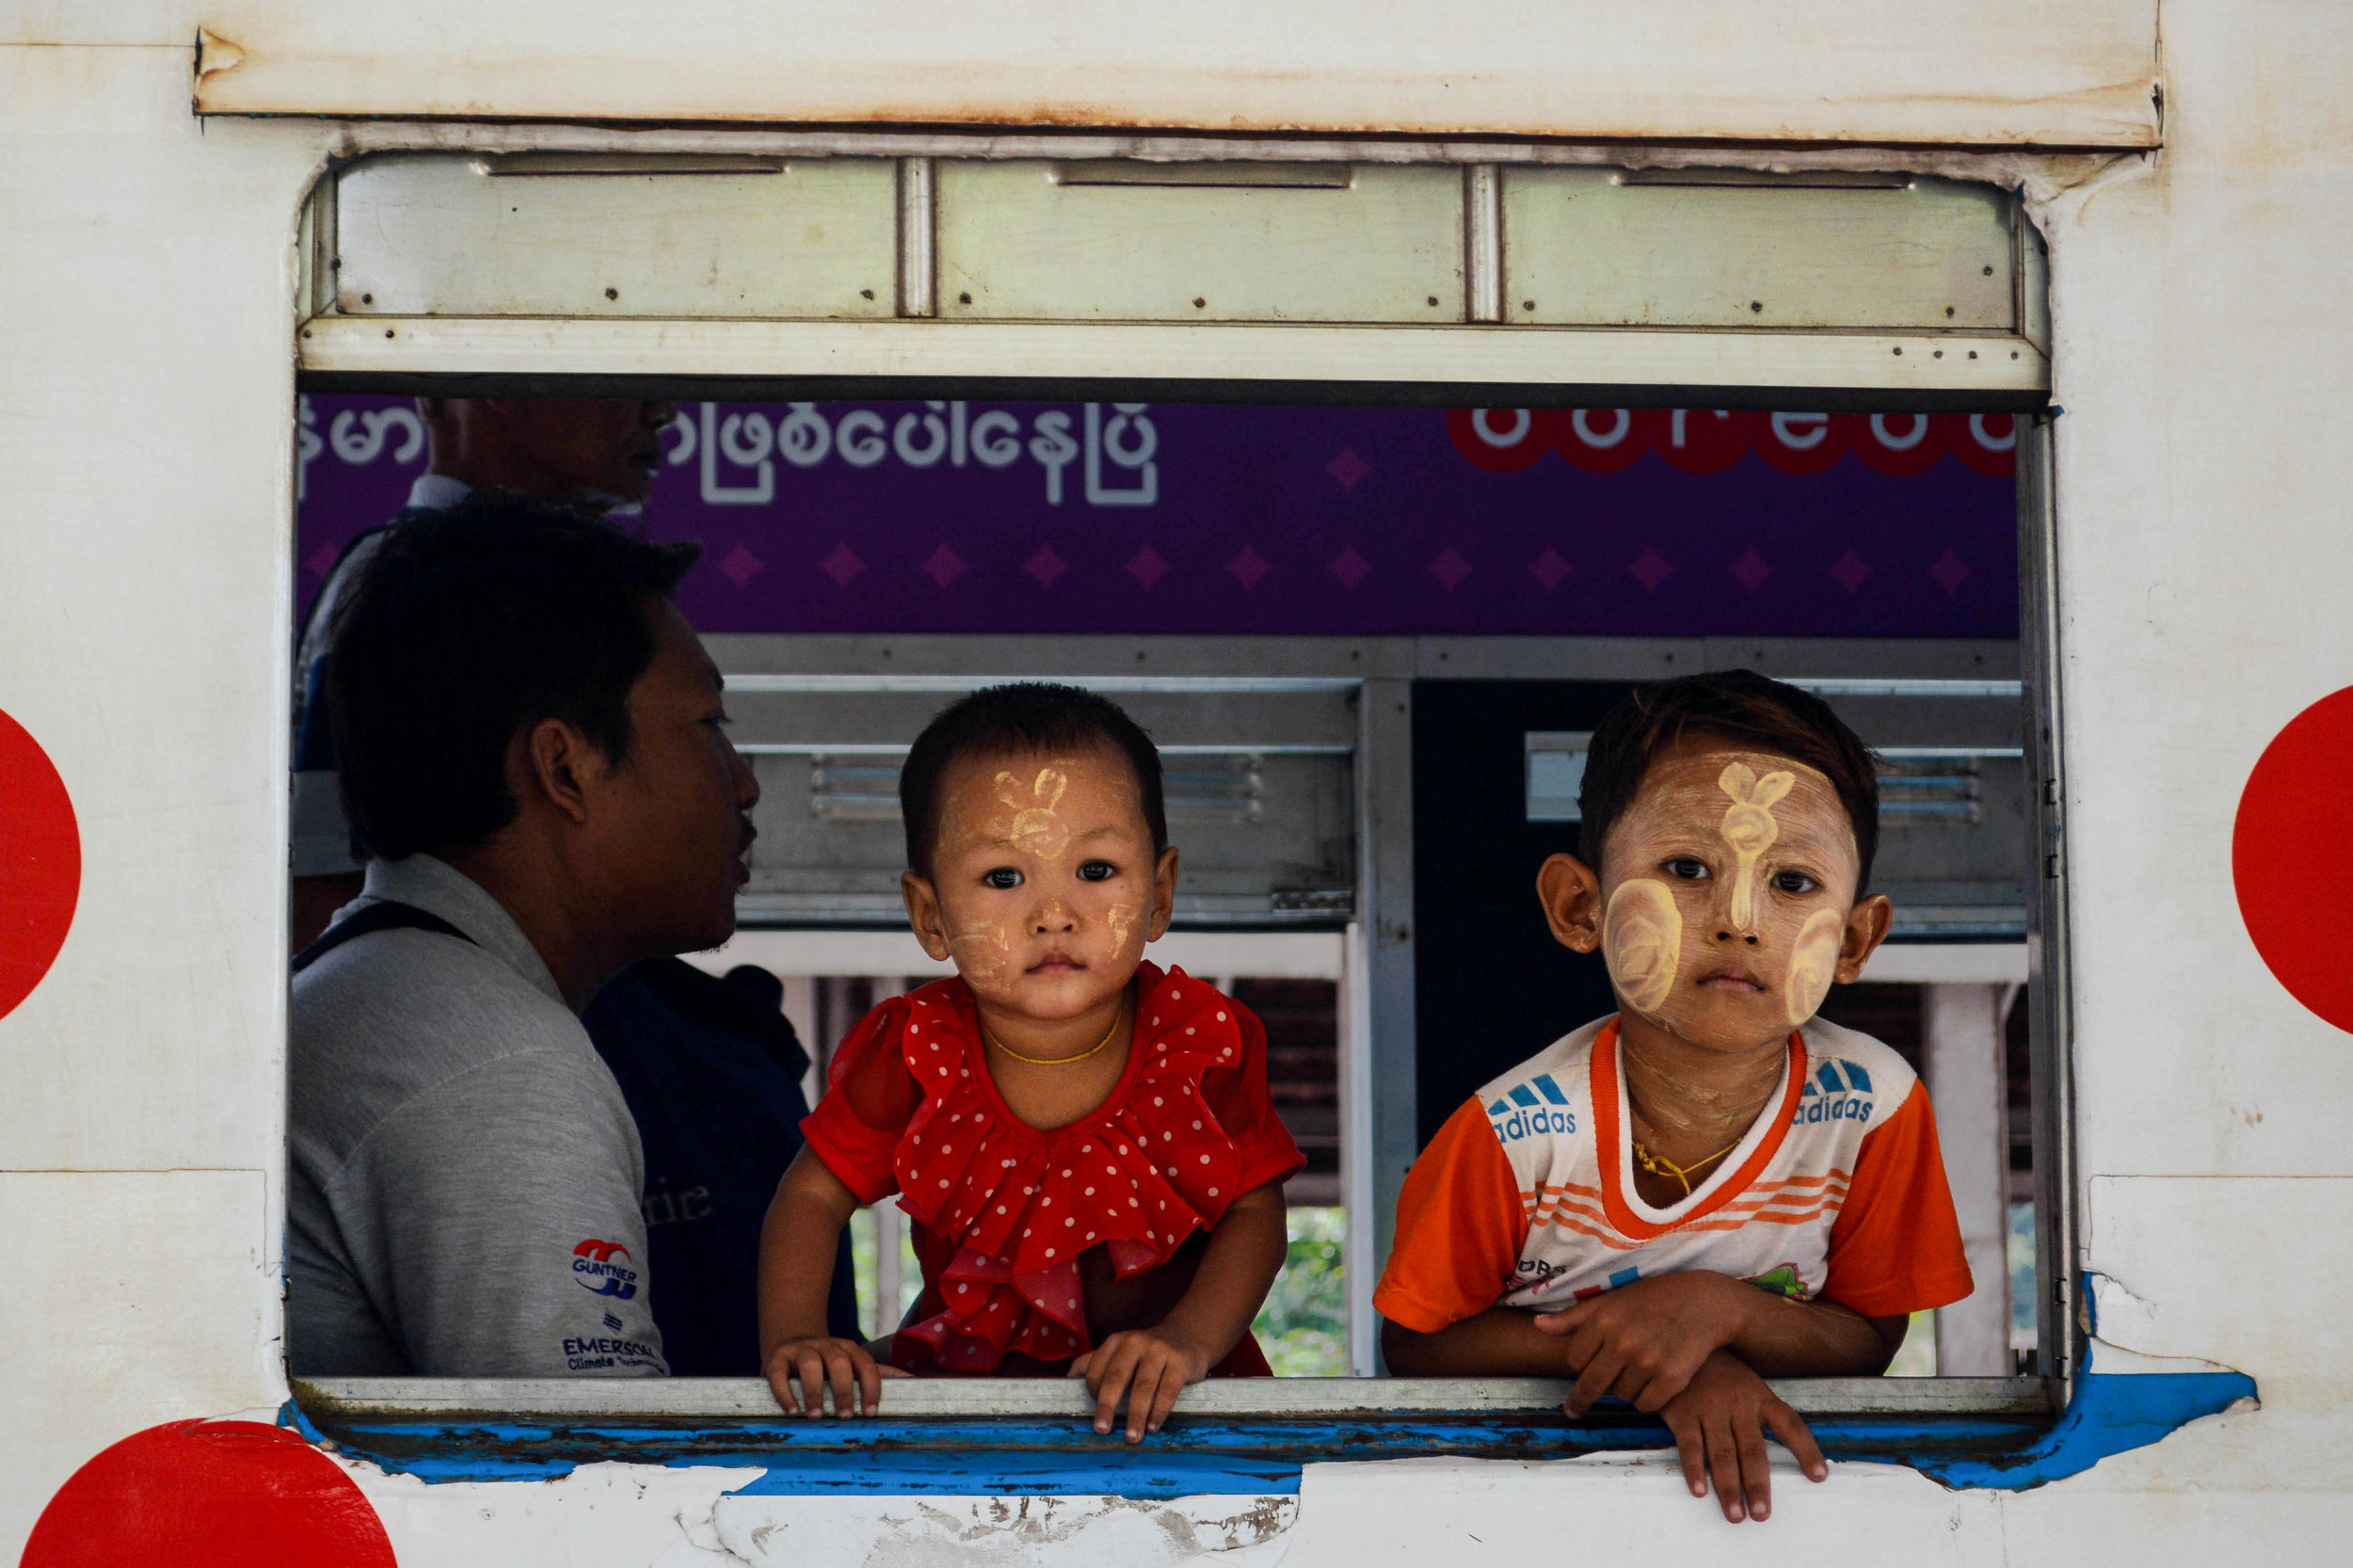  Two children ride the Yangon Circle Line train with traditional thanaka paint on their faces. (Image:  Fran Cresswell ) 